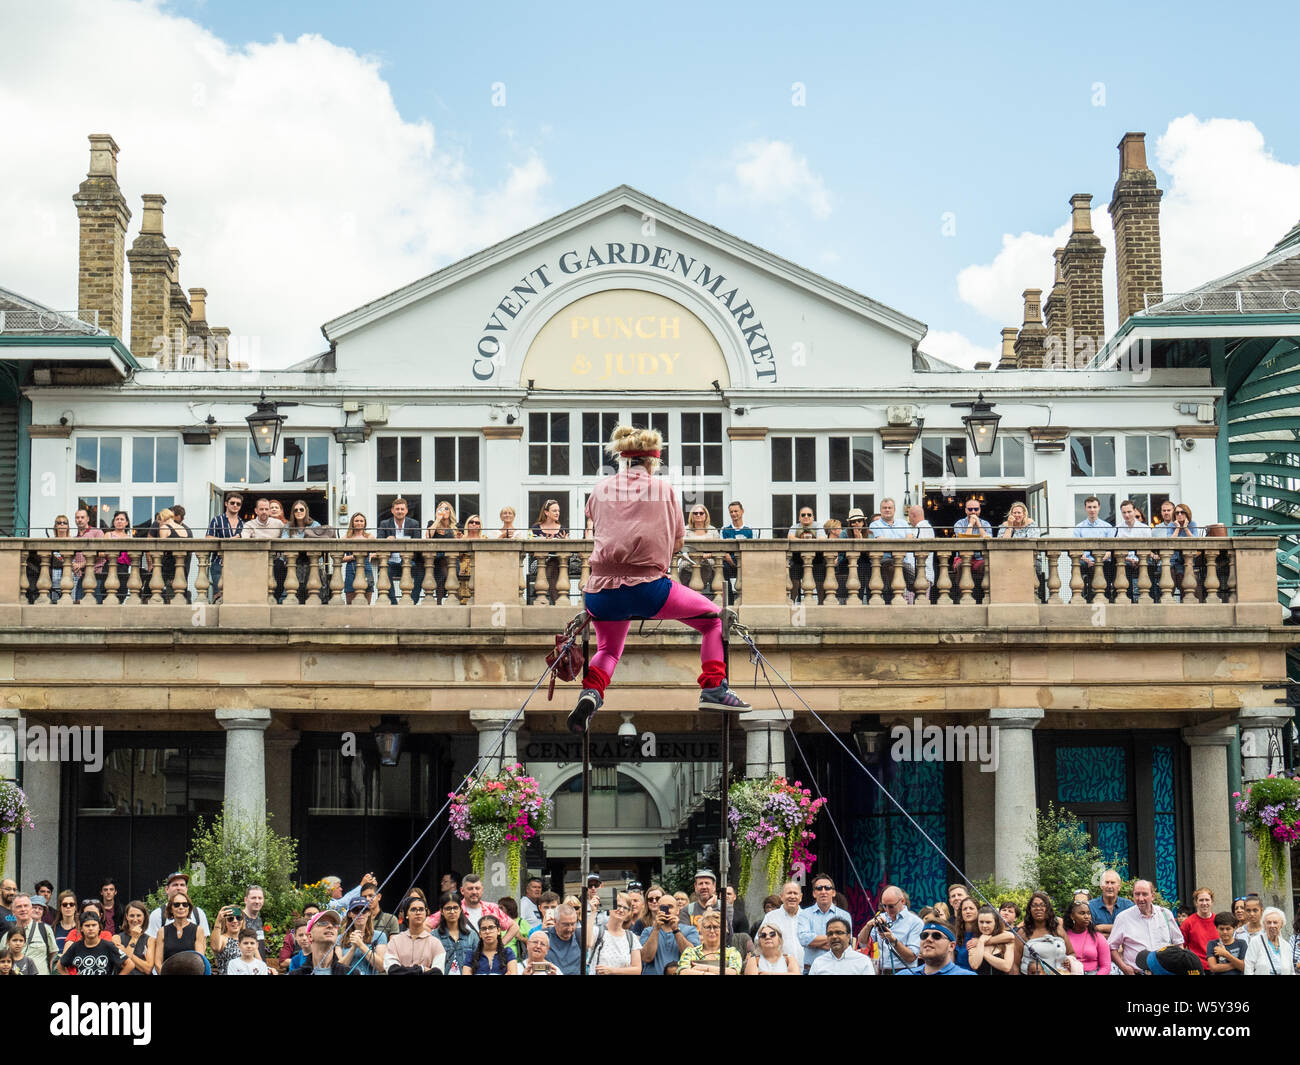 Crowds watching a Street entertainer at Covent Garden, London. Stock Photo